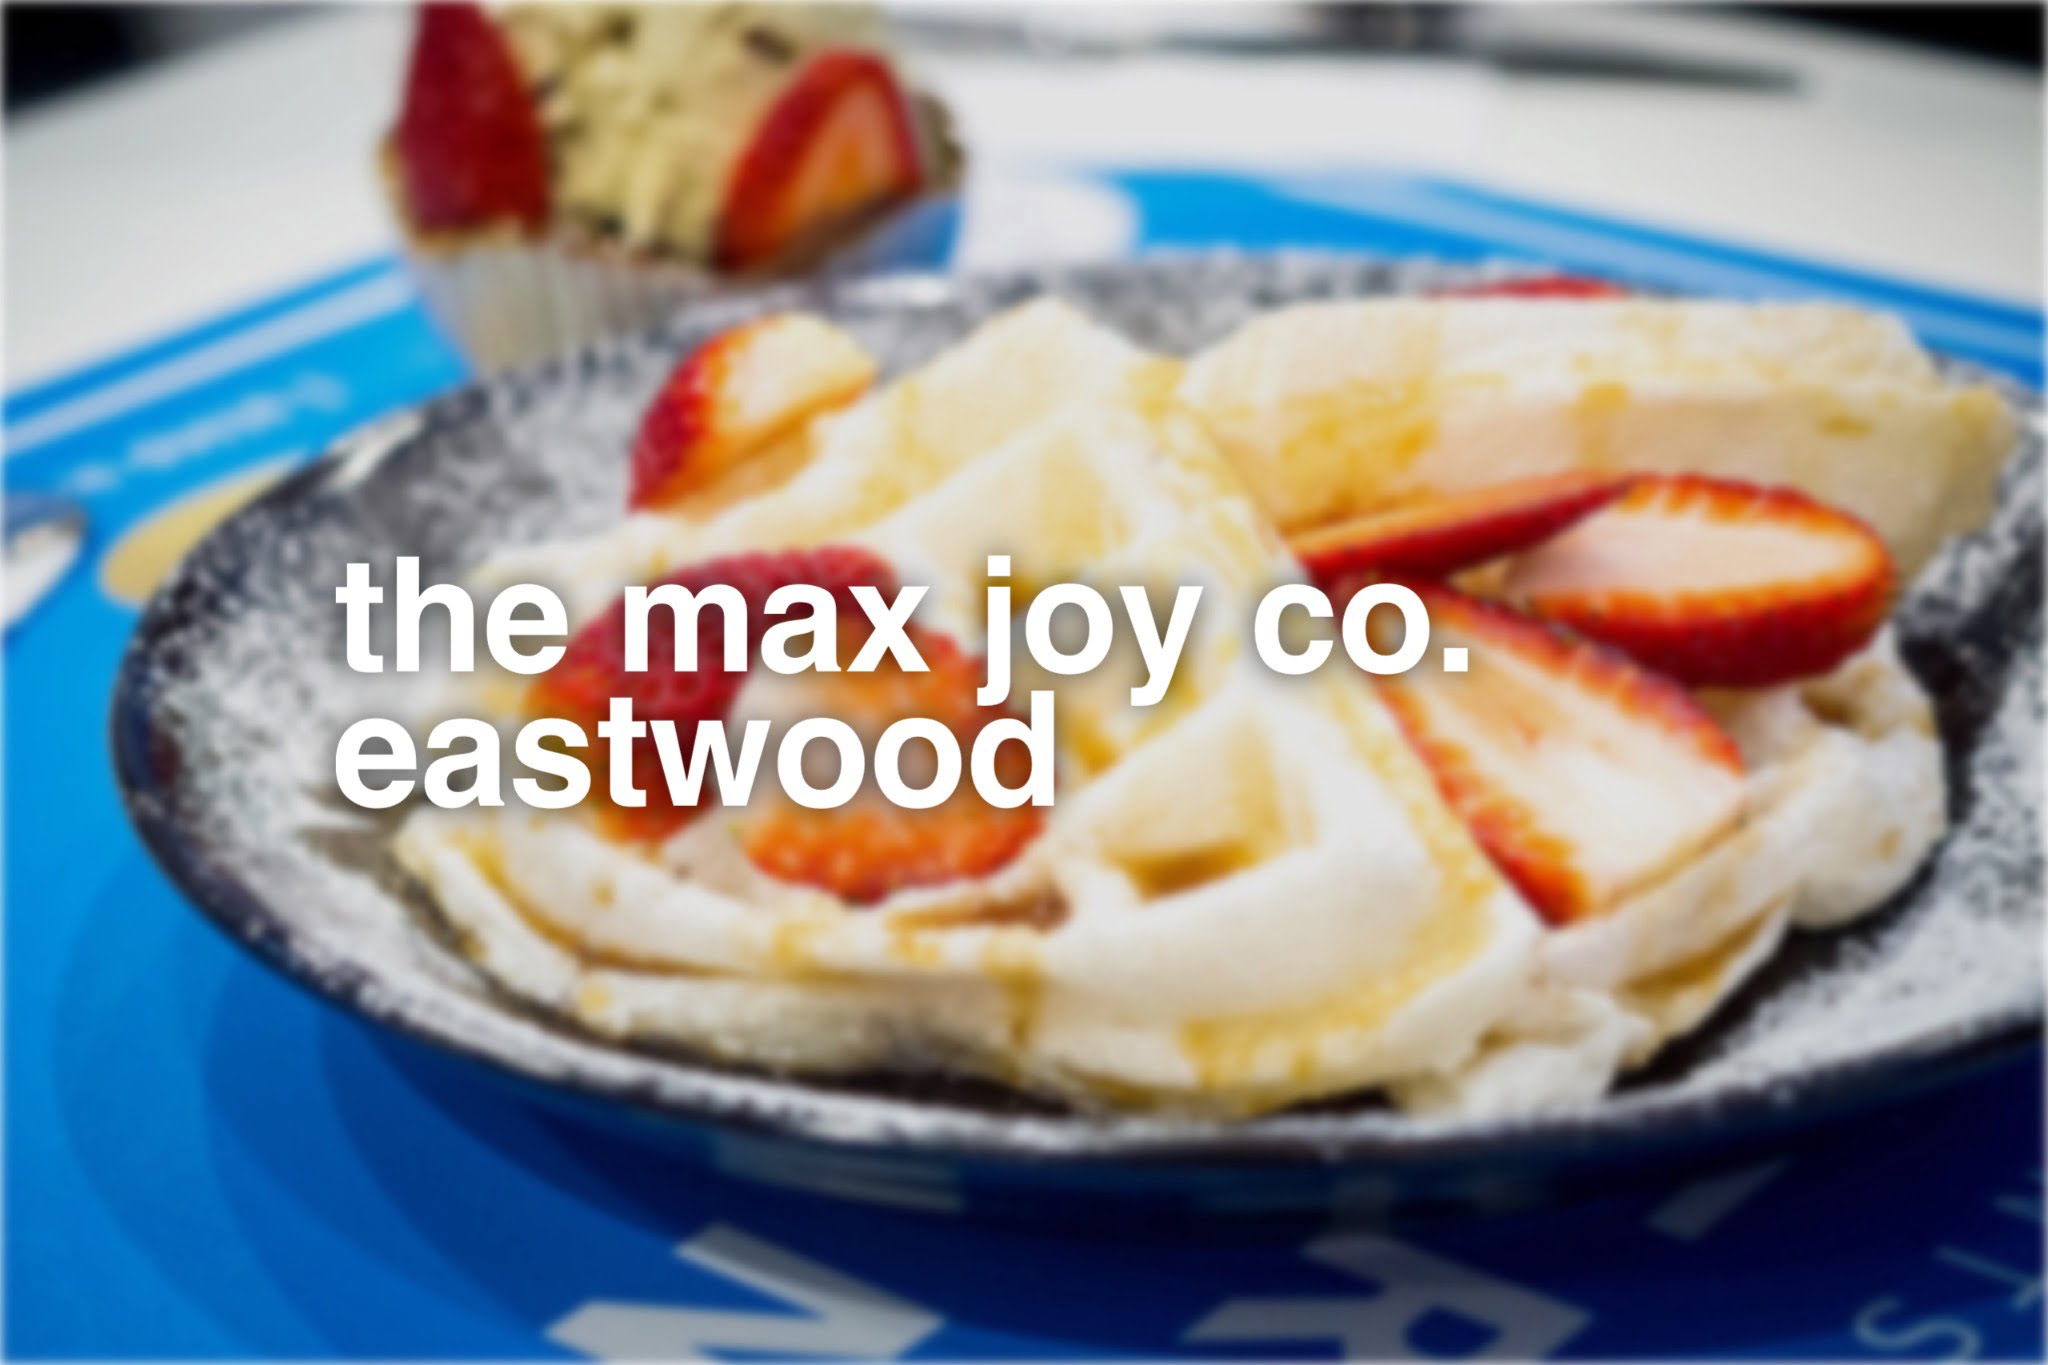 The Max Joy Co., Eastwood. Sydney Food Blog Review